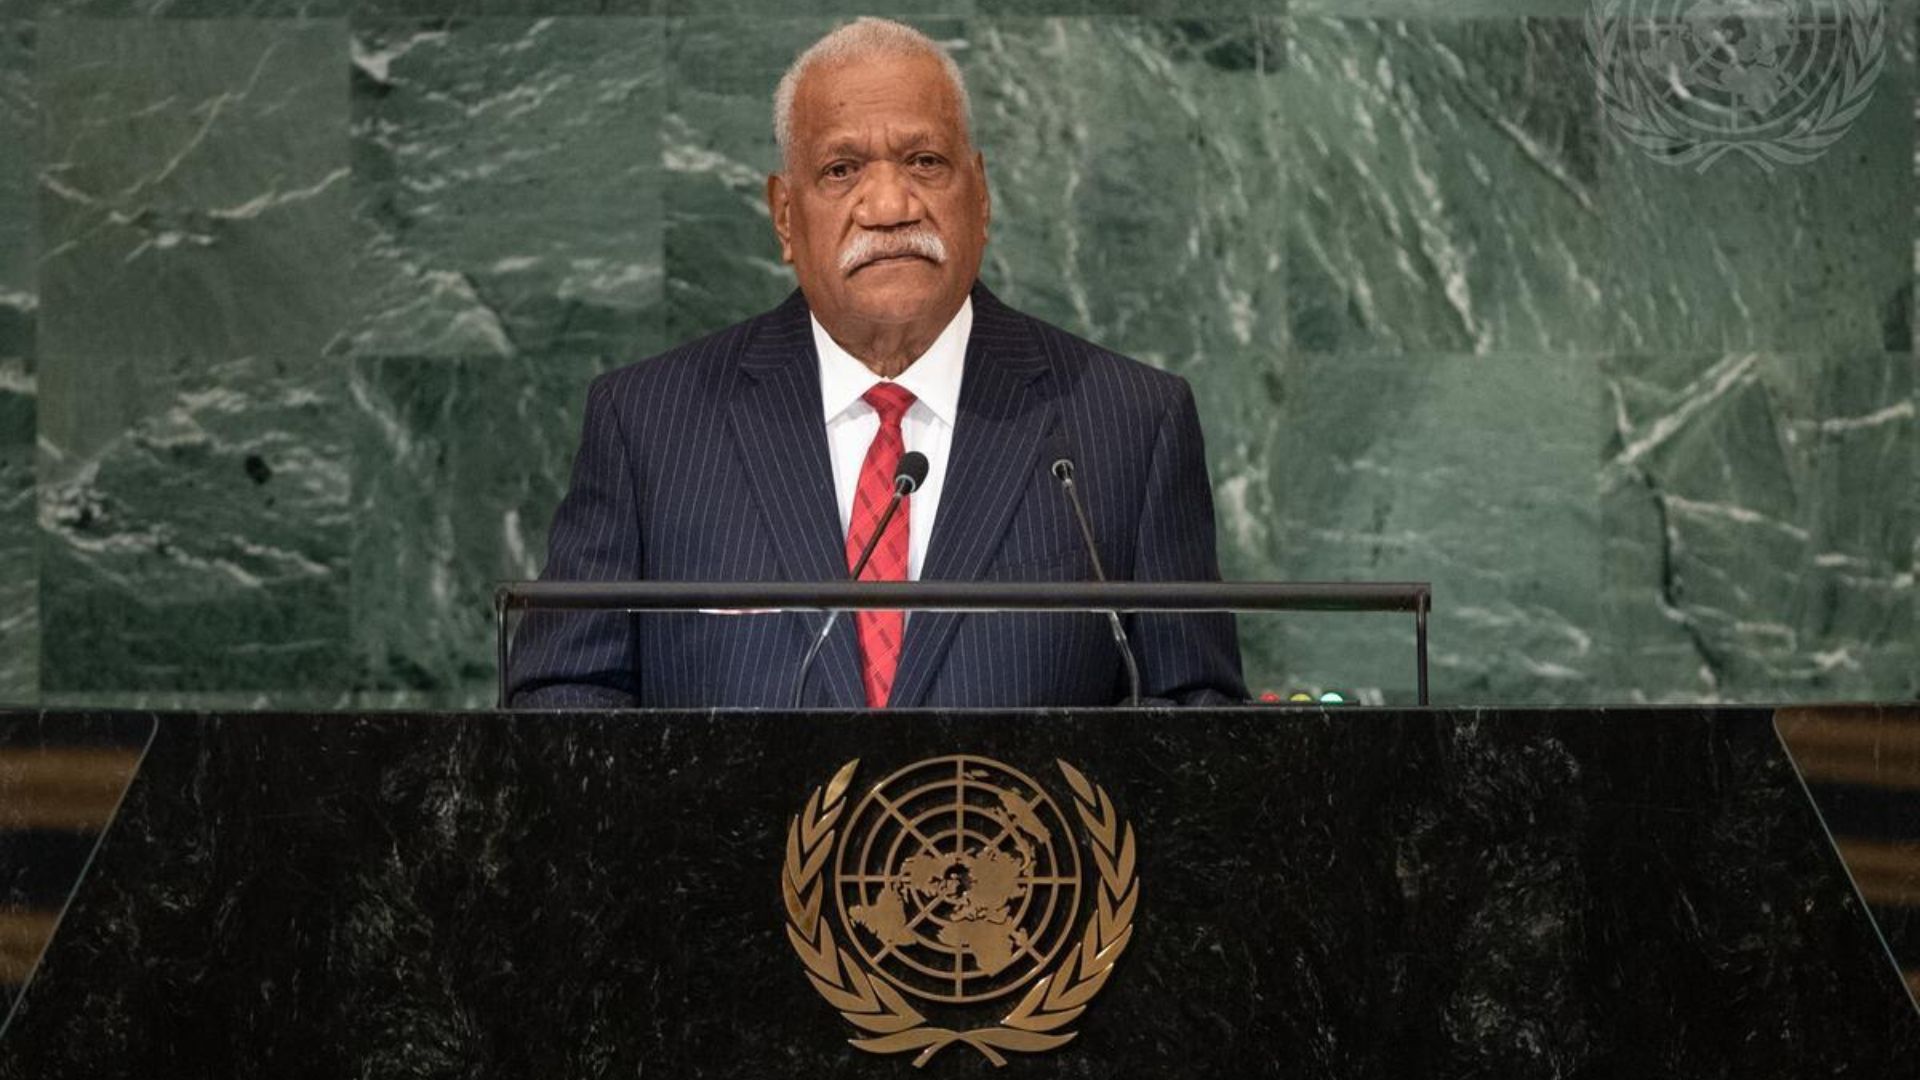 Read more about the article Vanuatu’s President Vurobaravu Speaks at the UN General Assembly, New York